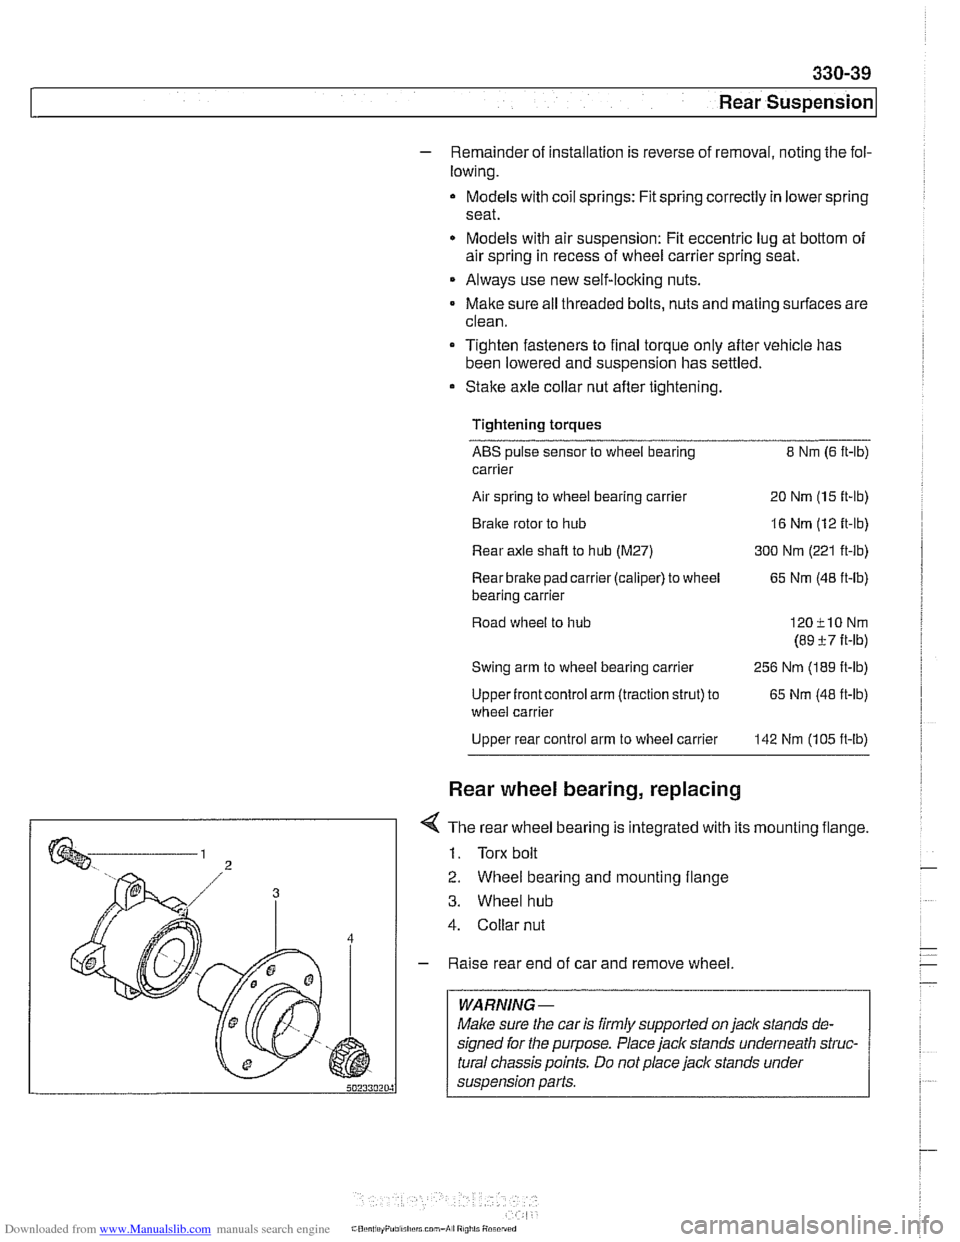 BMW 540i 1997 E39 User Guide Downloaded from www.Manualslib.com manuals search engine 
330-39 
I Rear suspension1 
- Remainder of installation is  reverse of removal, noting  the fol- 
lowing. 
Models  with coil springs:  Fit  sp